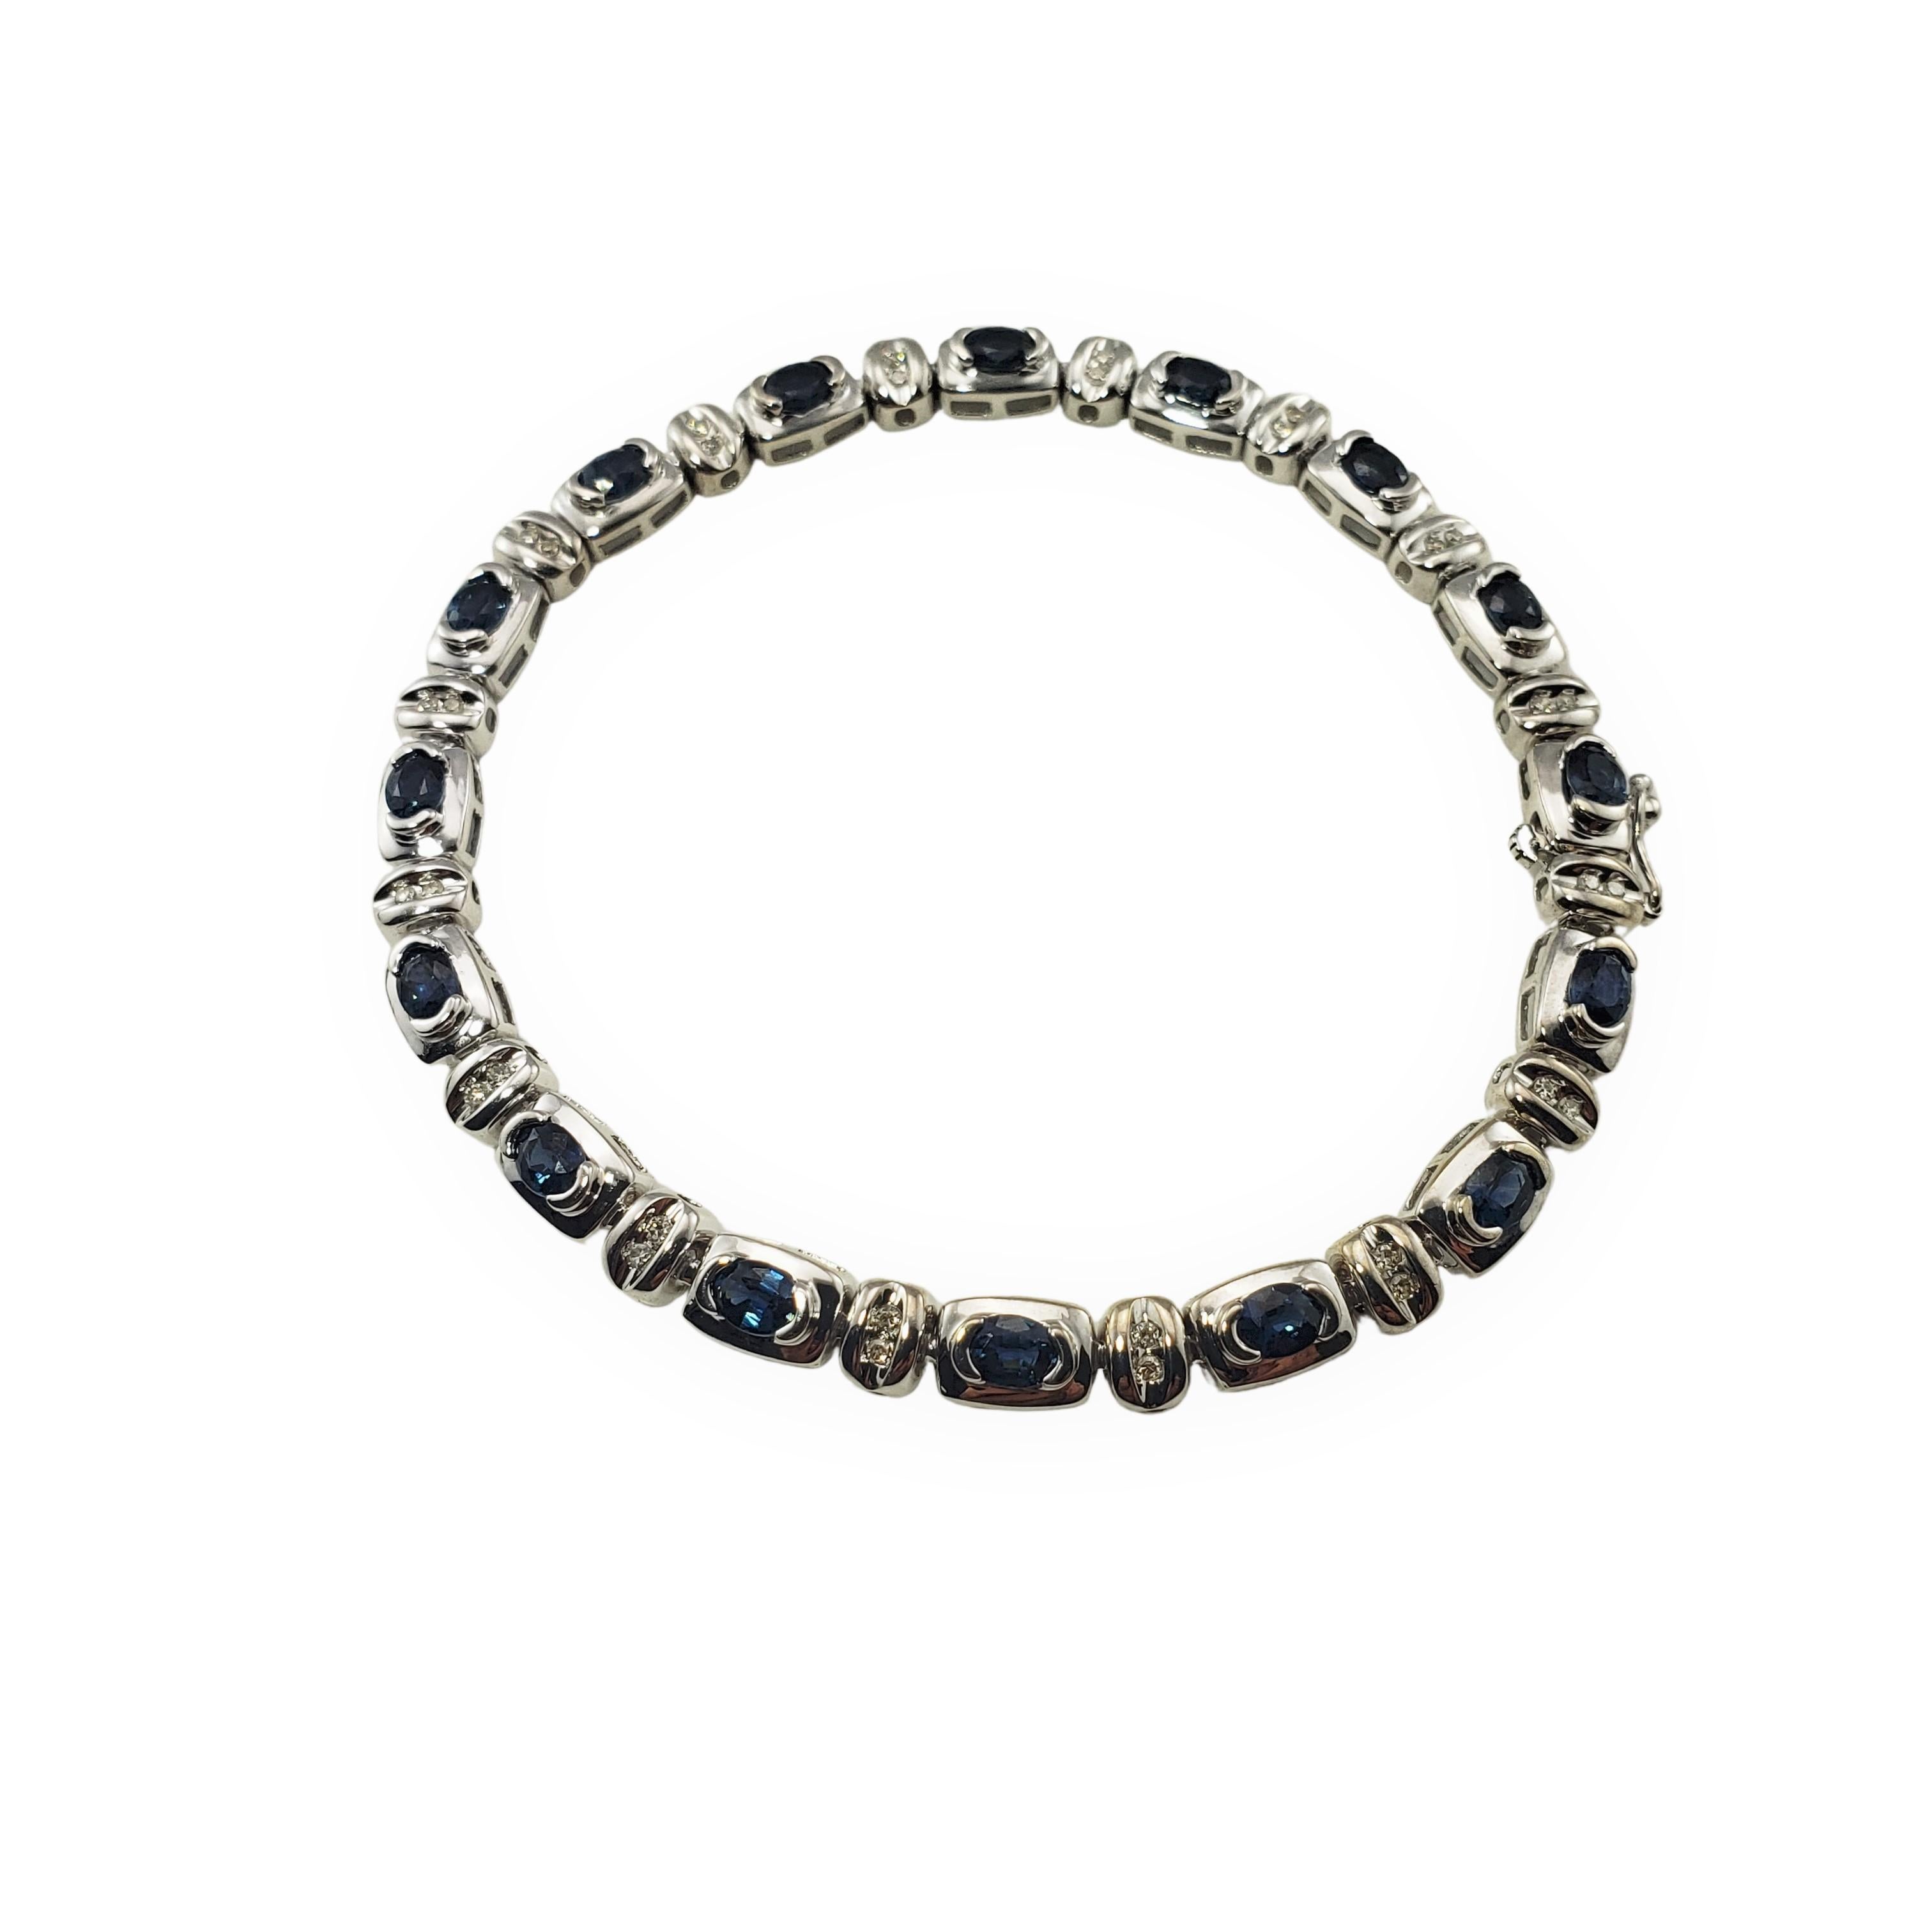 Vintage 14 Karat White Gold Sapphire and Diamond Bracelet-

This lovely bracelet features 32 round single cut diamonds and 15 oval blue sapphires (4 mm x 3 mm each) set in classic 14K white gold.  Width:  5 mm.

Approximate total diamond weight: 